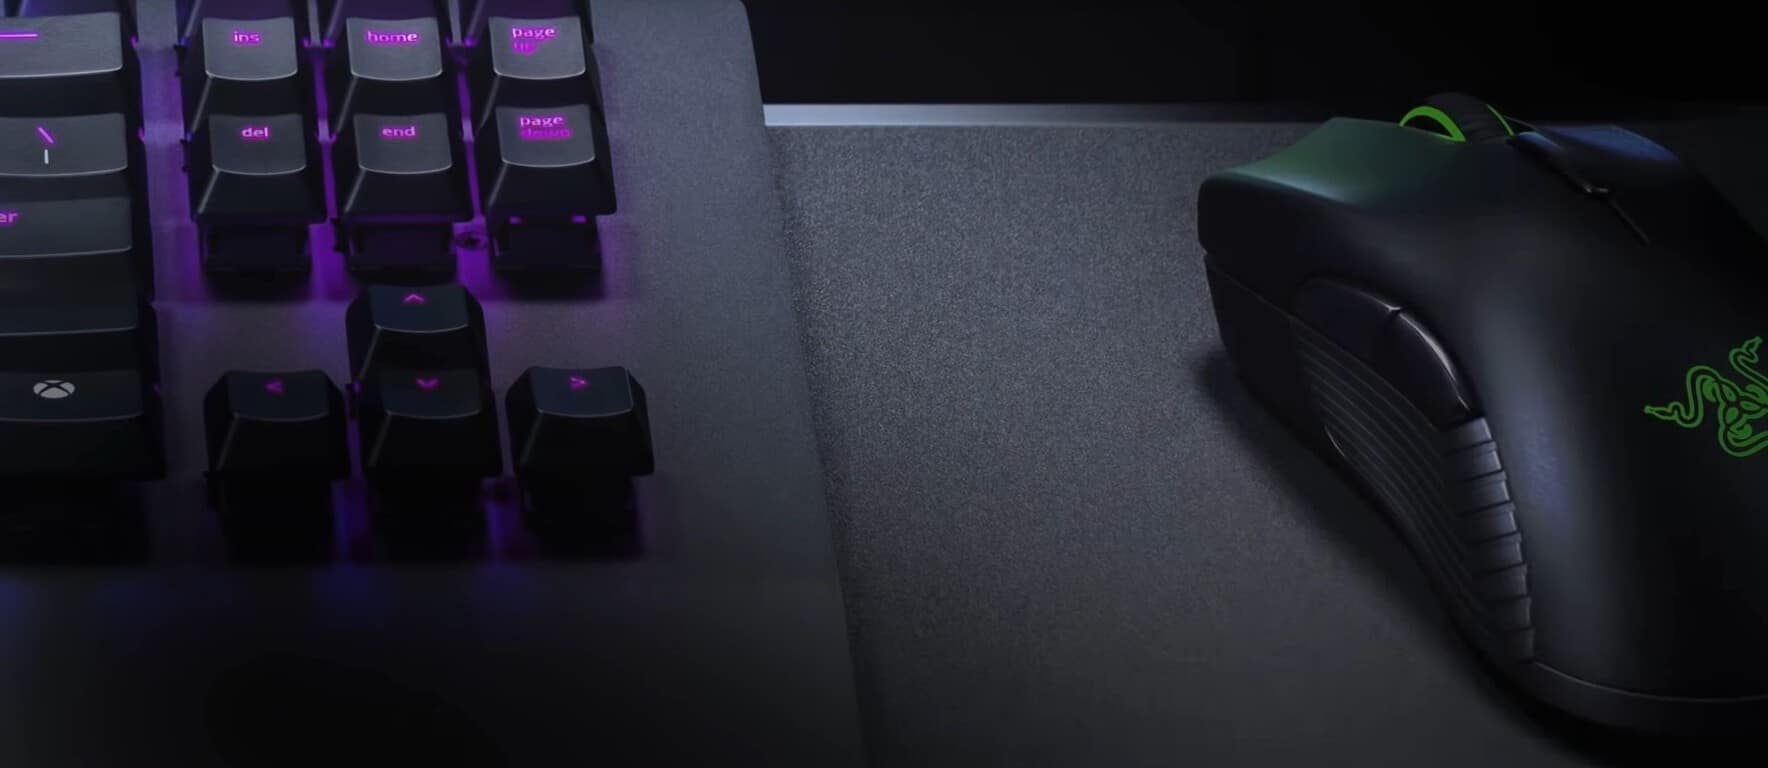 Razer unveils its first keyboard and mouse designed for Xbox One consoles - OnMSFT.com - December 18, 2018